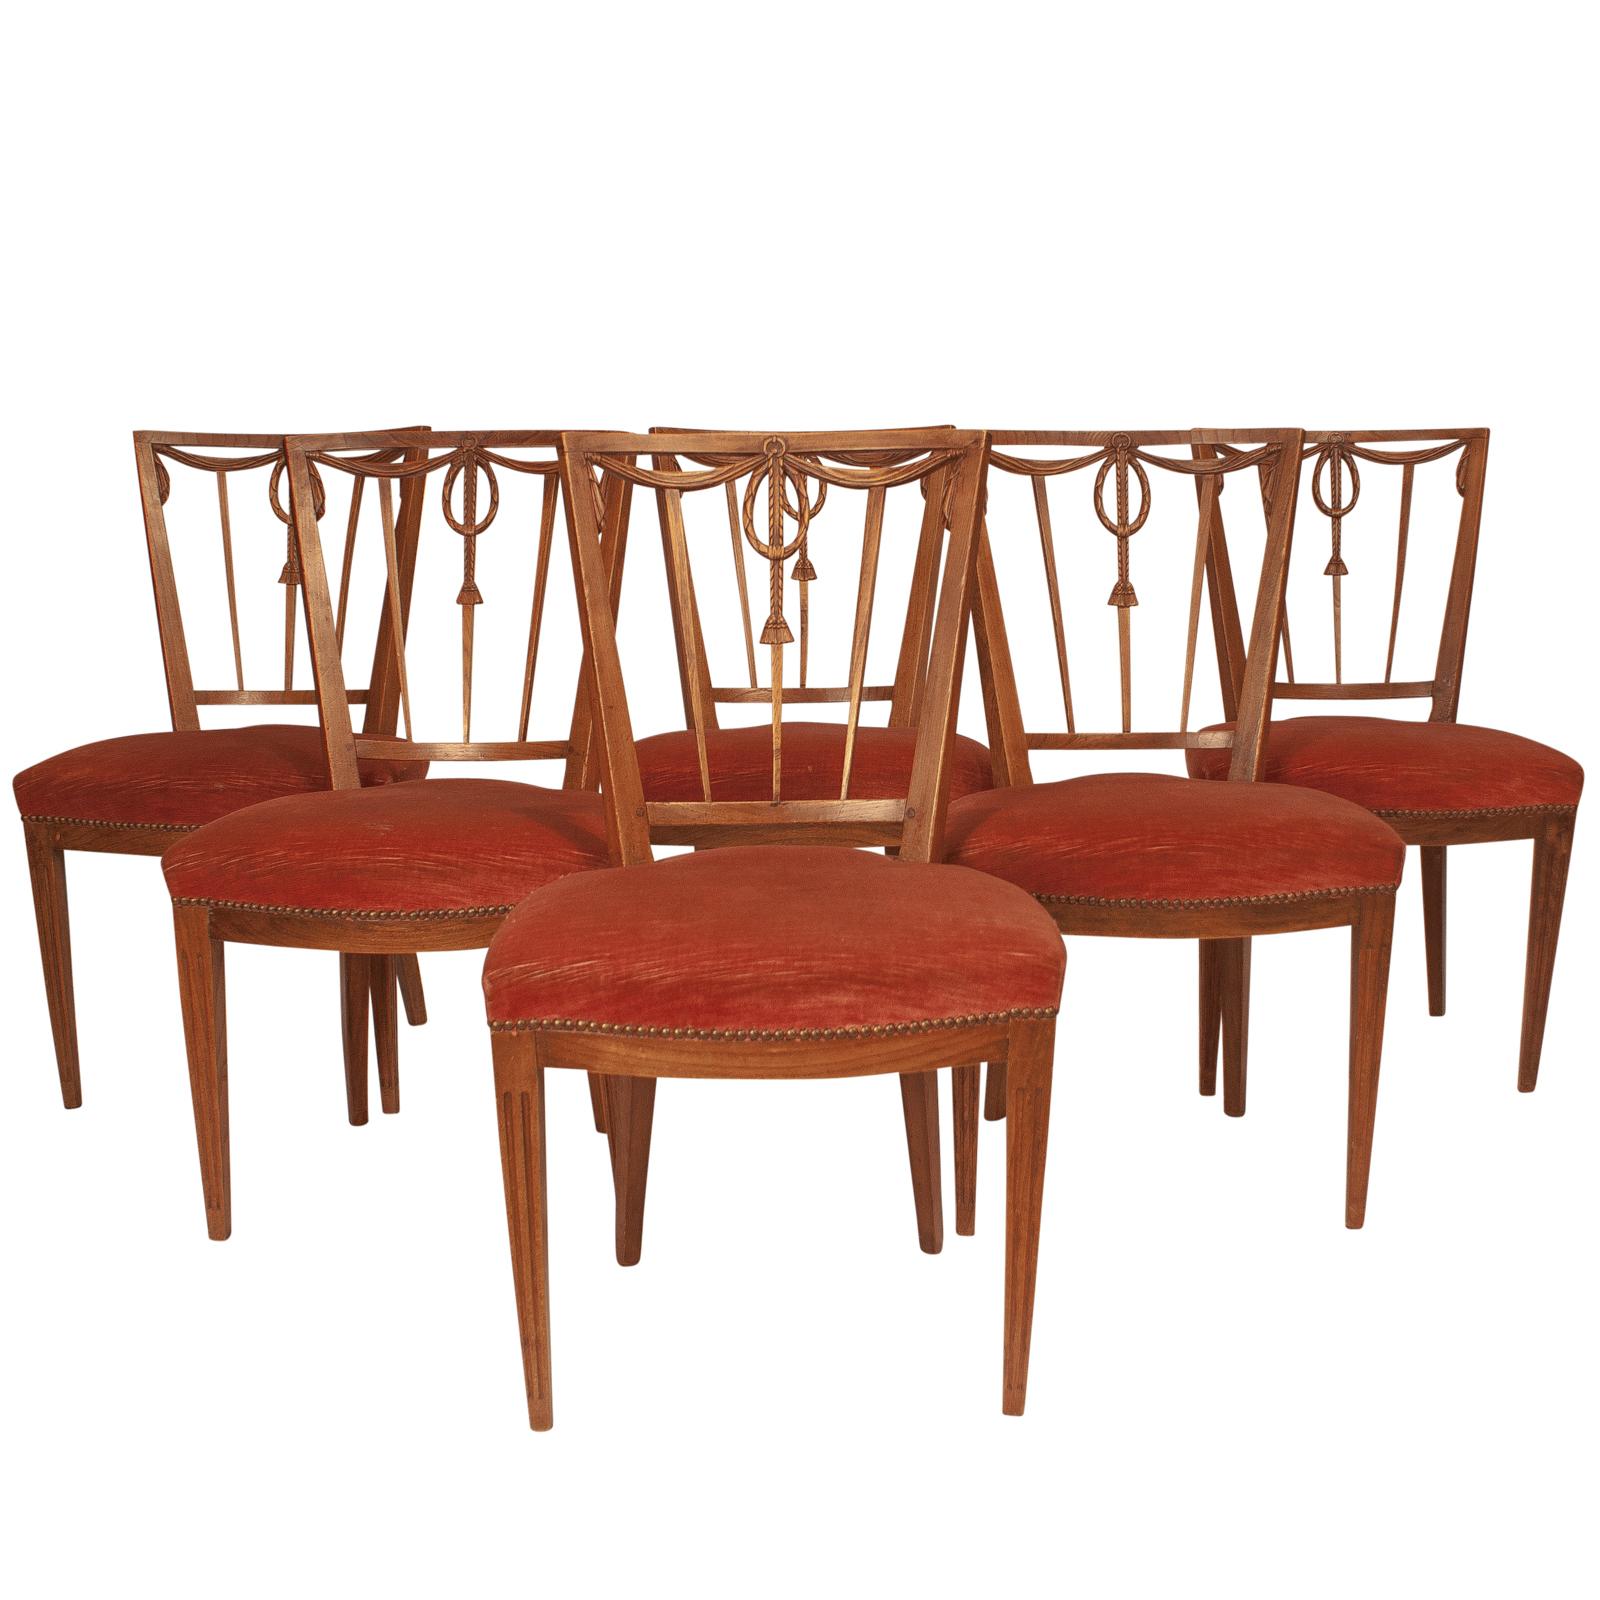 Set of 6 Dining Chairs, Belgium, circa 1800 For Sale